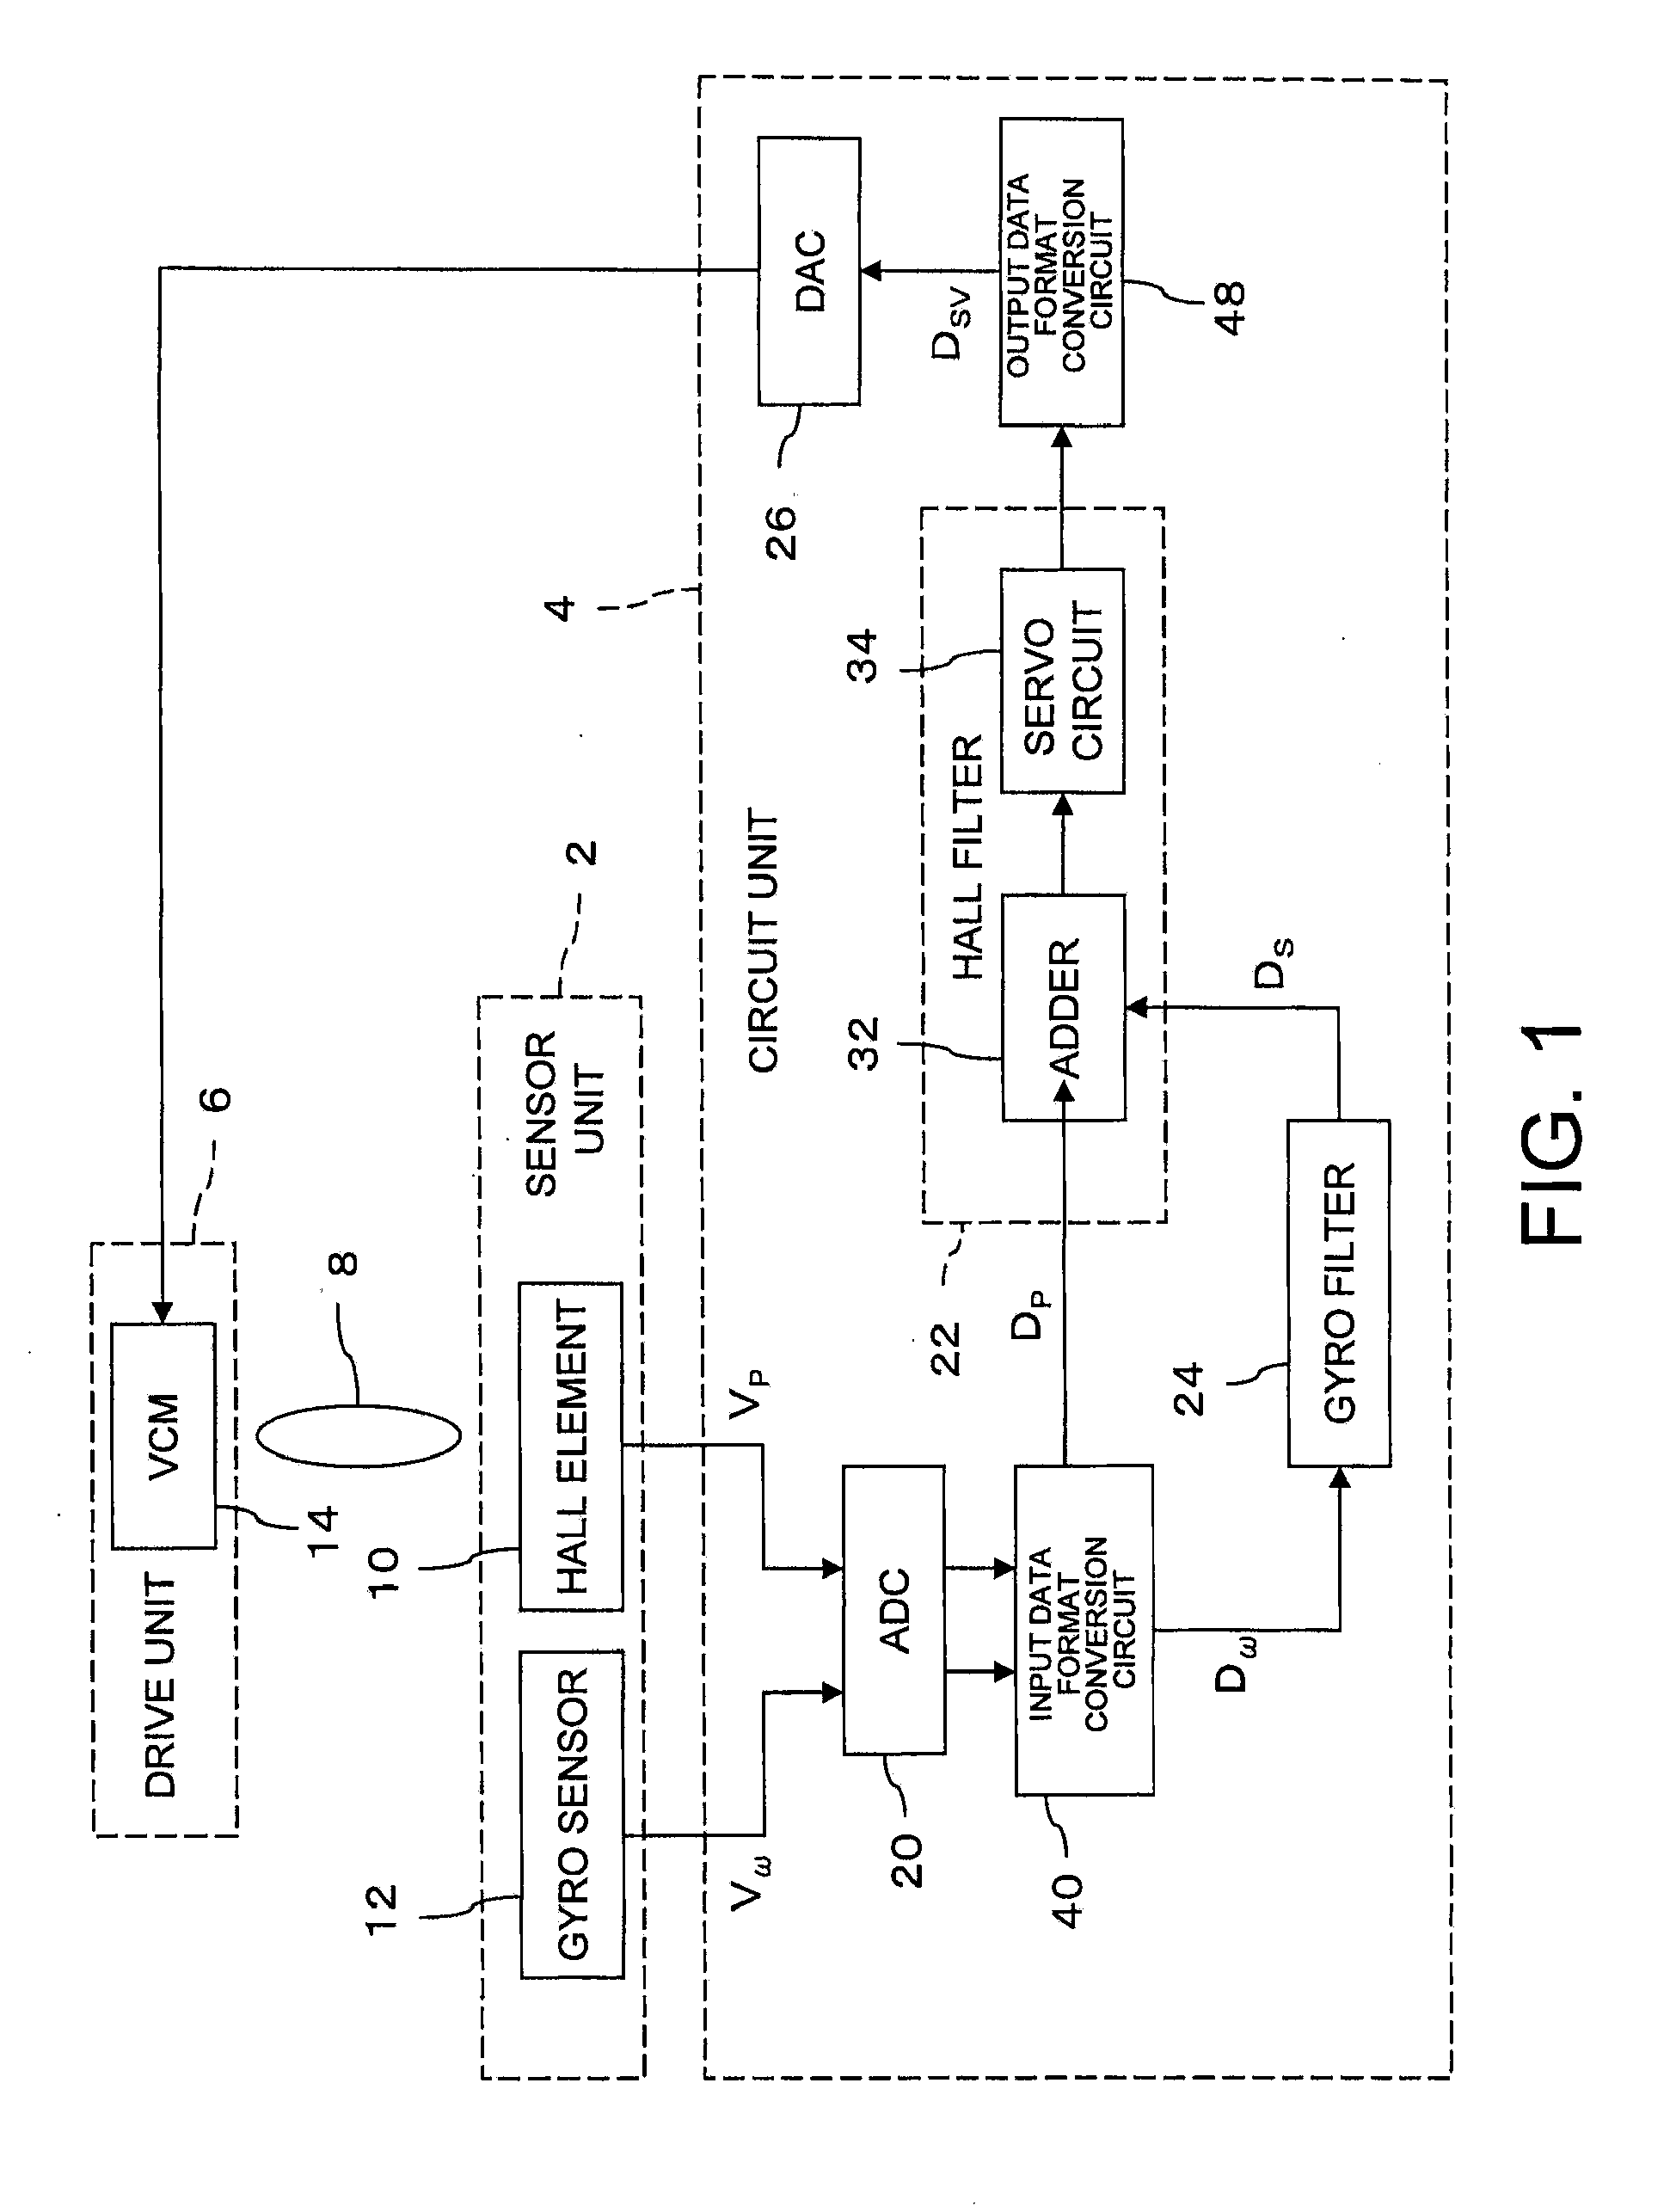 Control circuit for image-capturing device